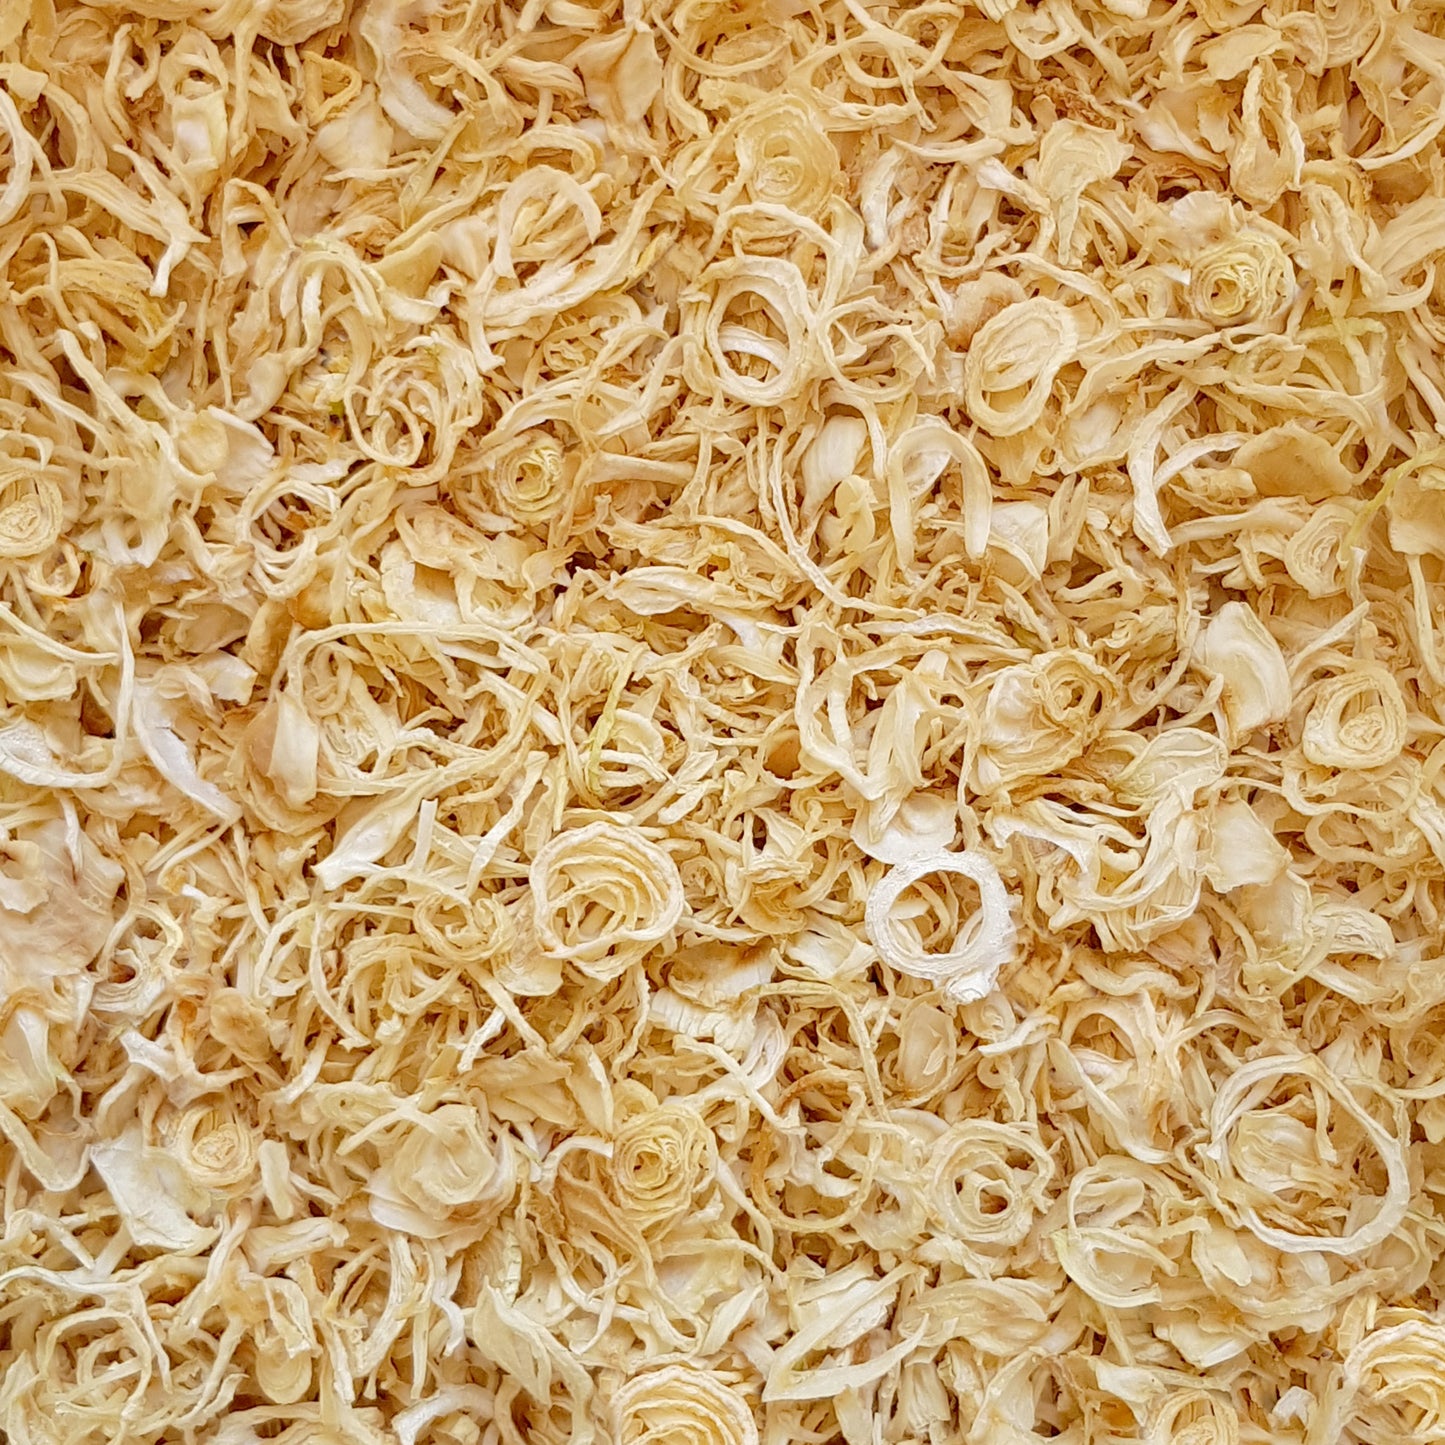 Full frame overhead image of BY NATURE Dried Onion Rings - preservative-free.